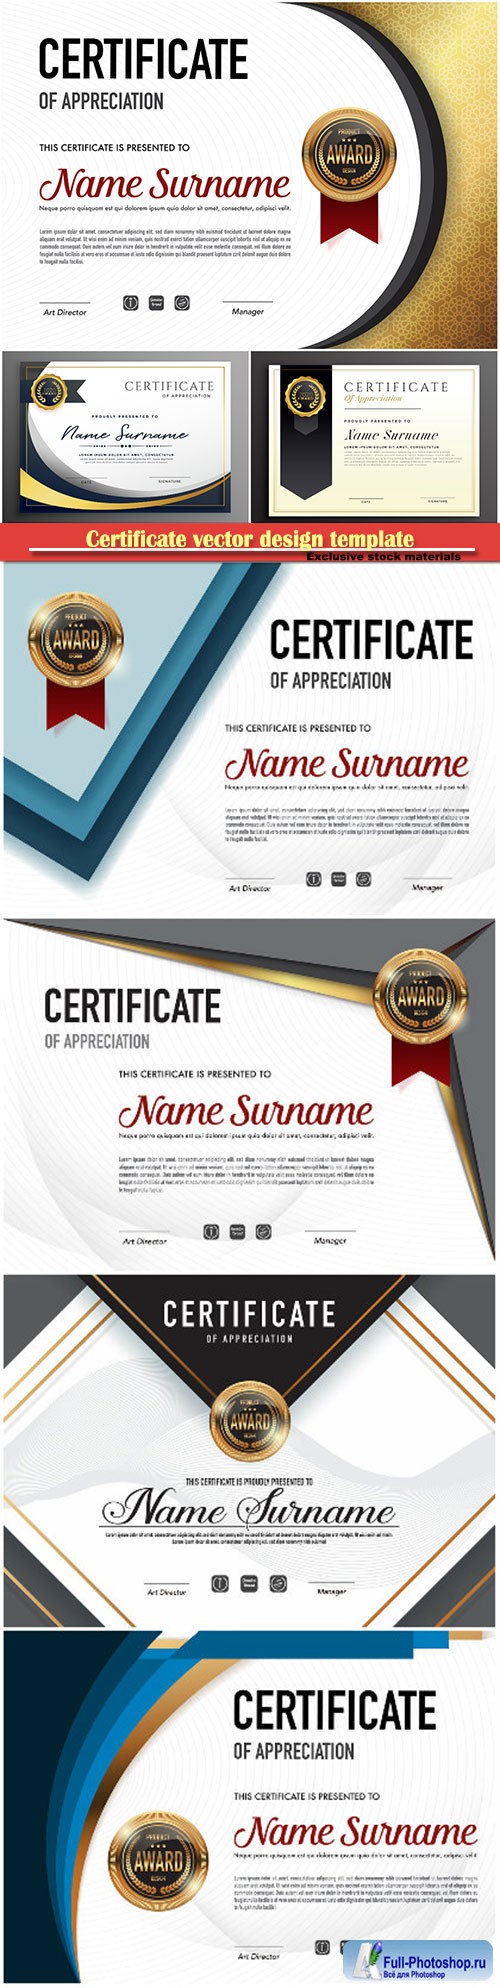 Certificate and vector diploma design template # 68